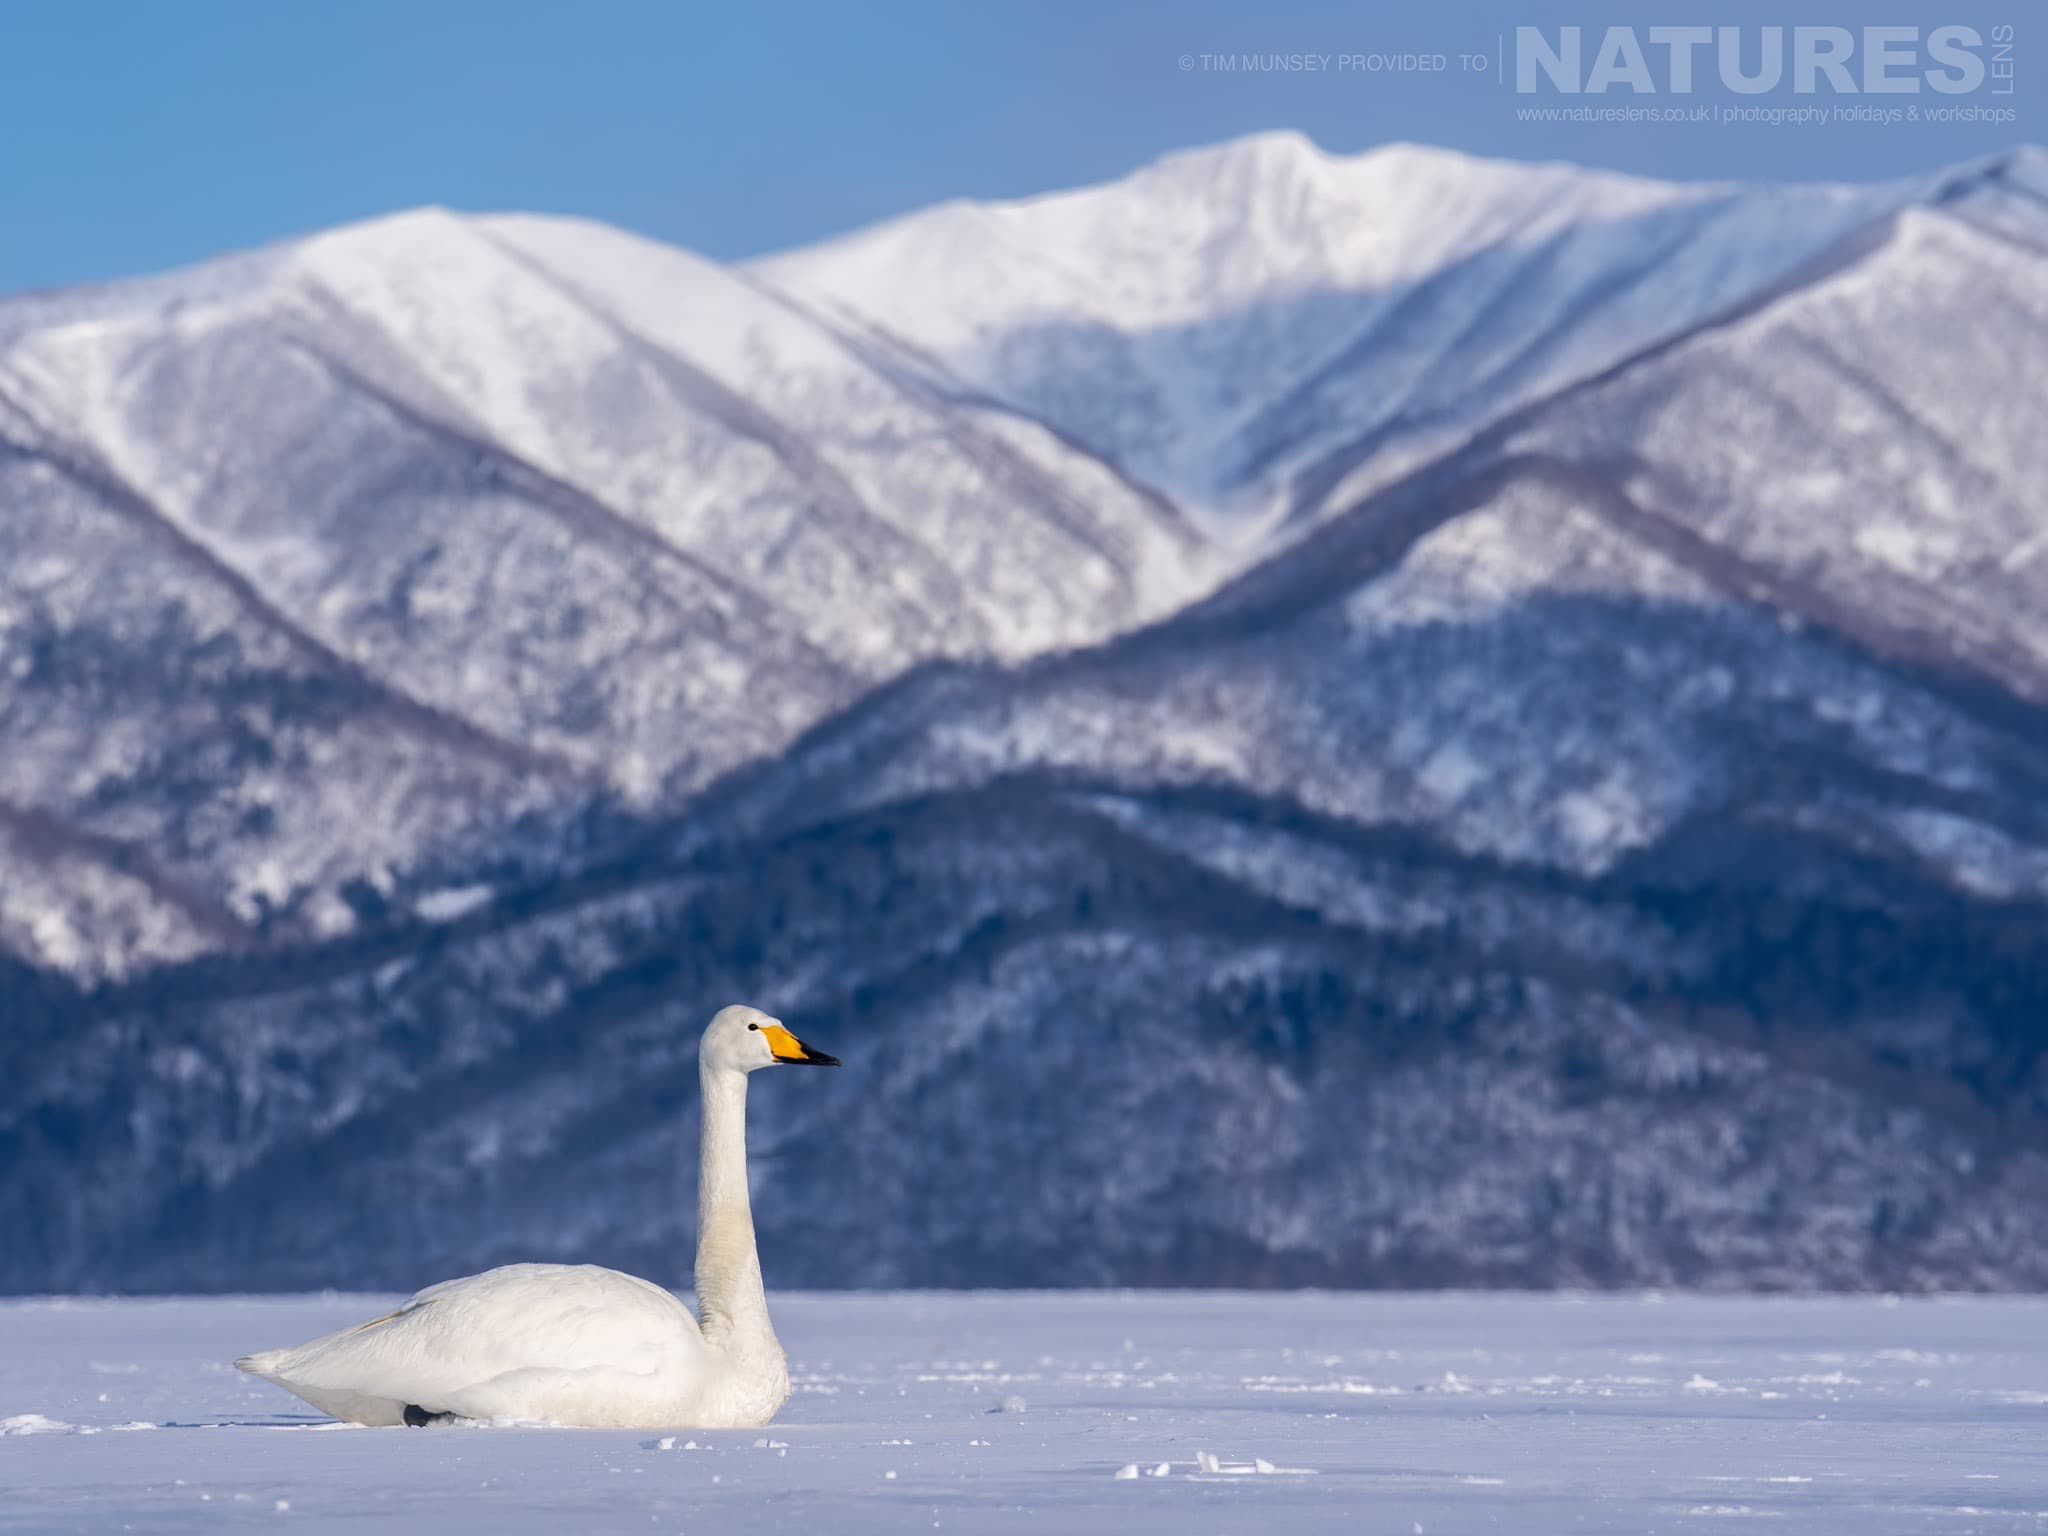 One Of The Whooper Swans Rests On The Frozen Lake With A Fantastic Snowy Backdrop One Of The Species Featured During Our Japan's Winter Wildlife Photography Holiday